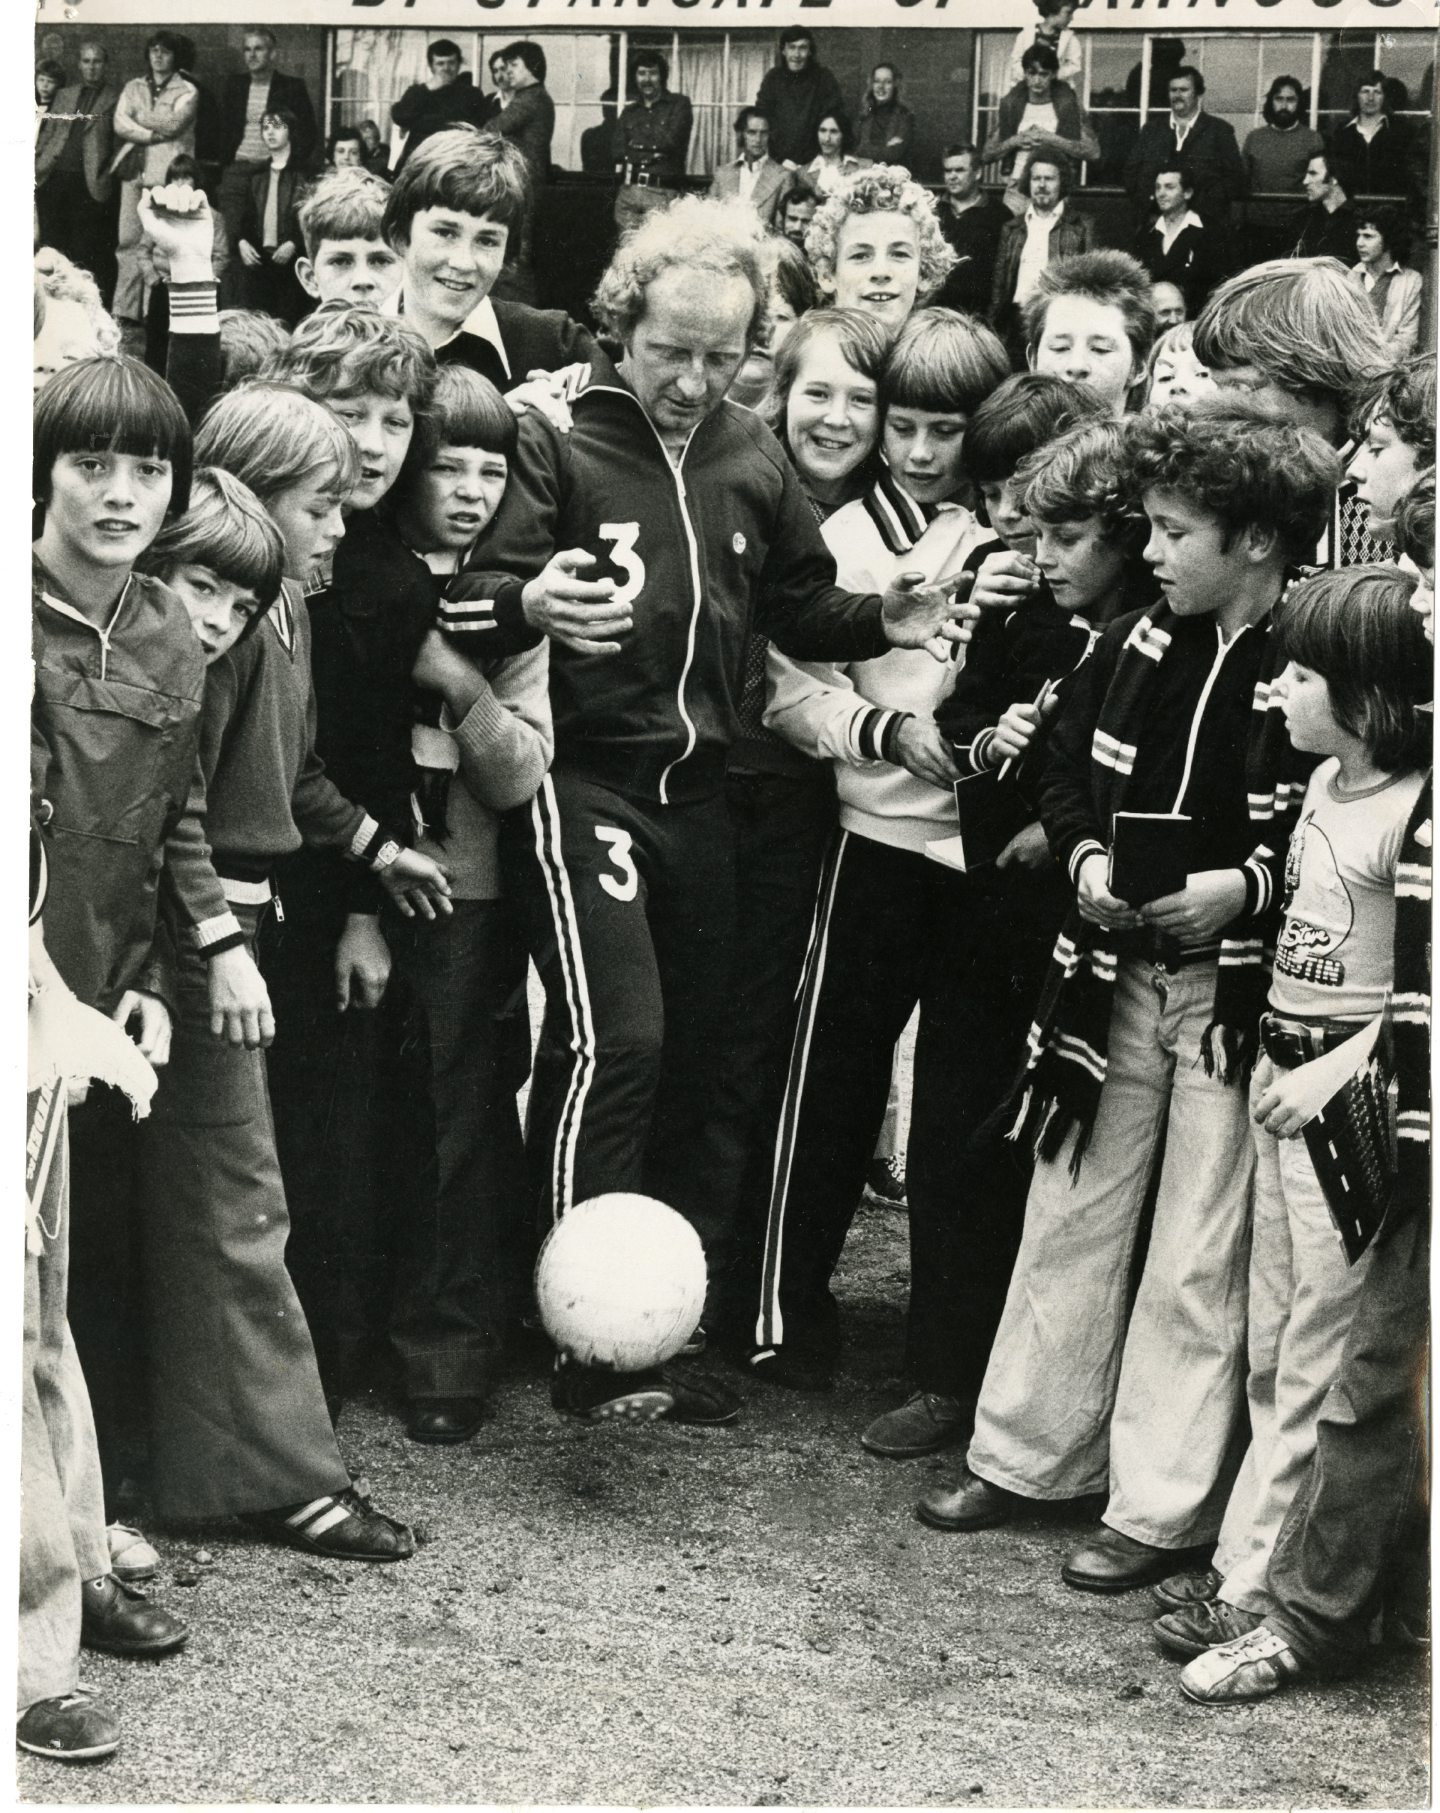 Jimmy Johnstone does a spot of ball juggling for the benefit of young admirers at Dundee's open day in July 1977.